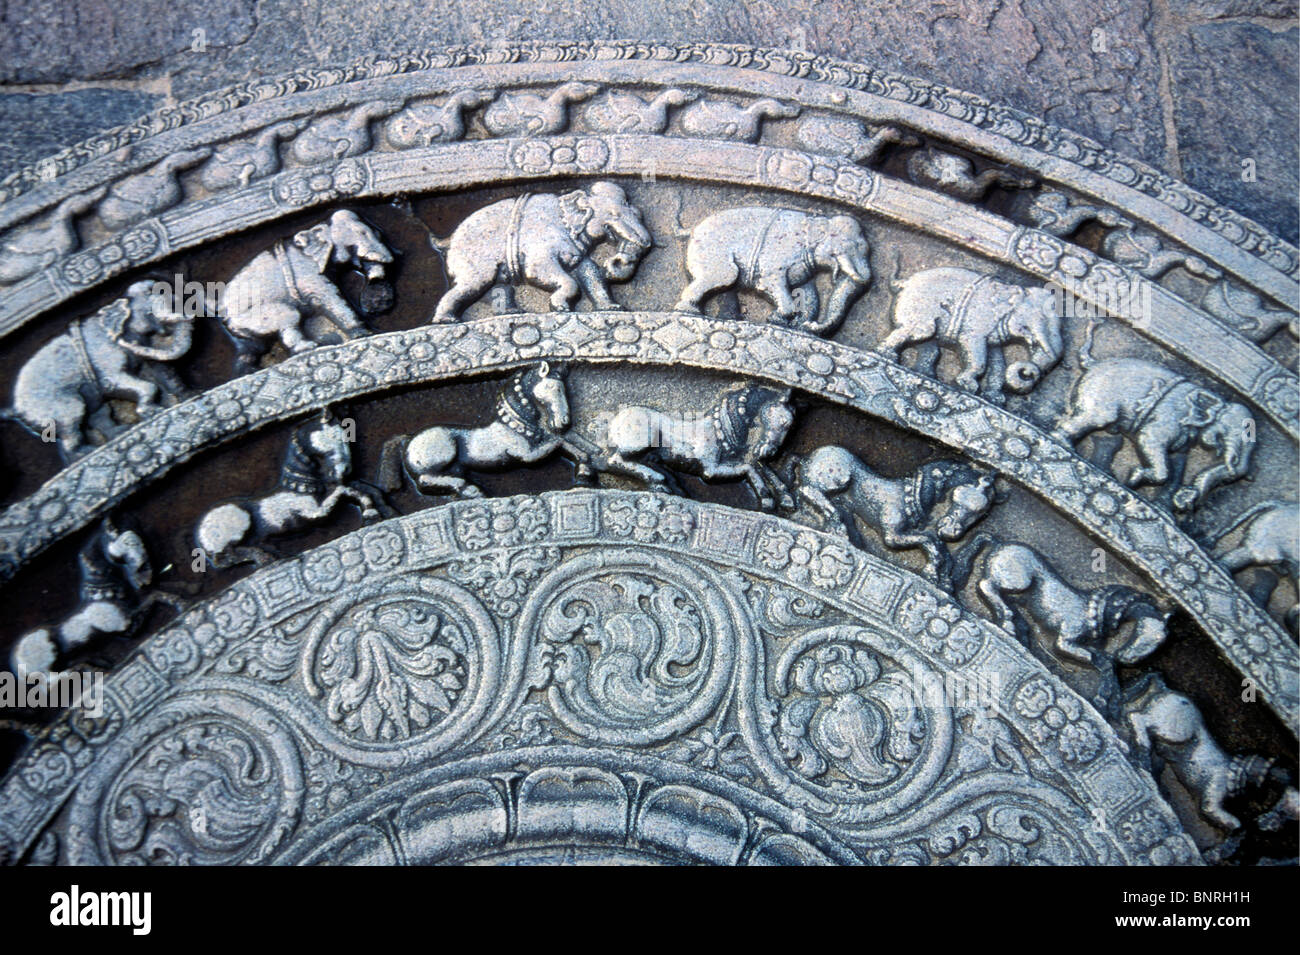 The moonstone carving from the ancient Buddhist city of Polonnaruwa, Sri Lanka Stock Photo